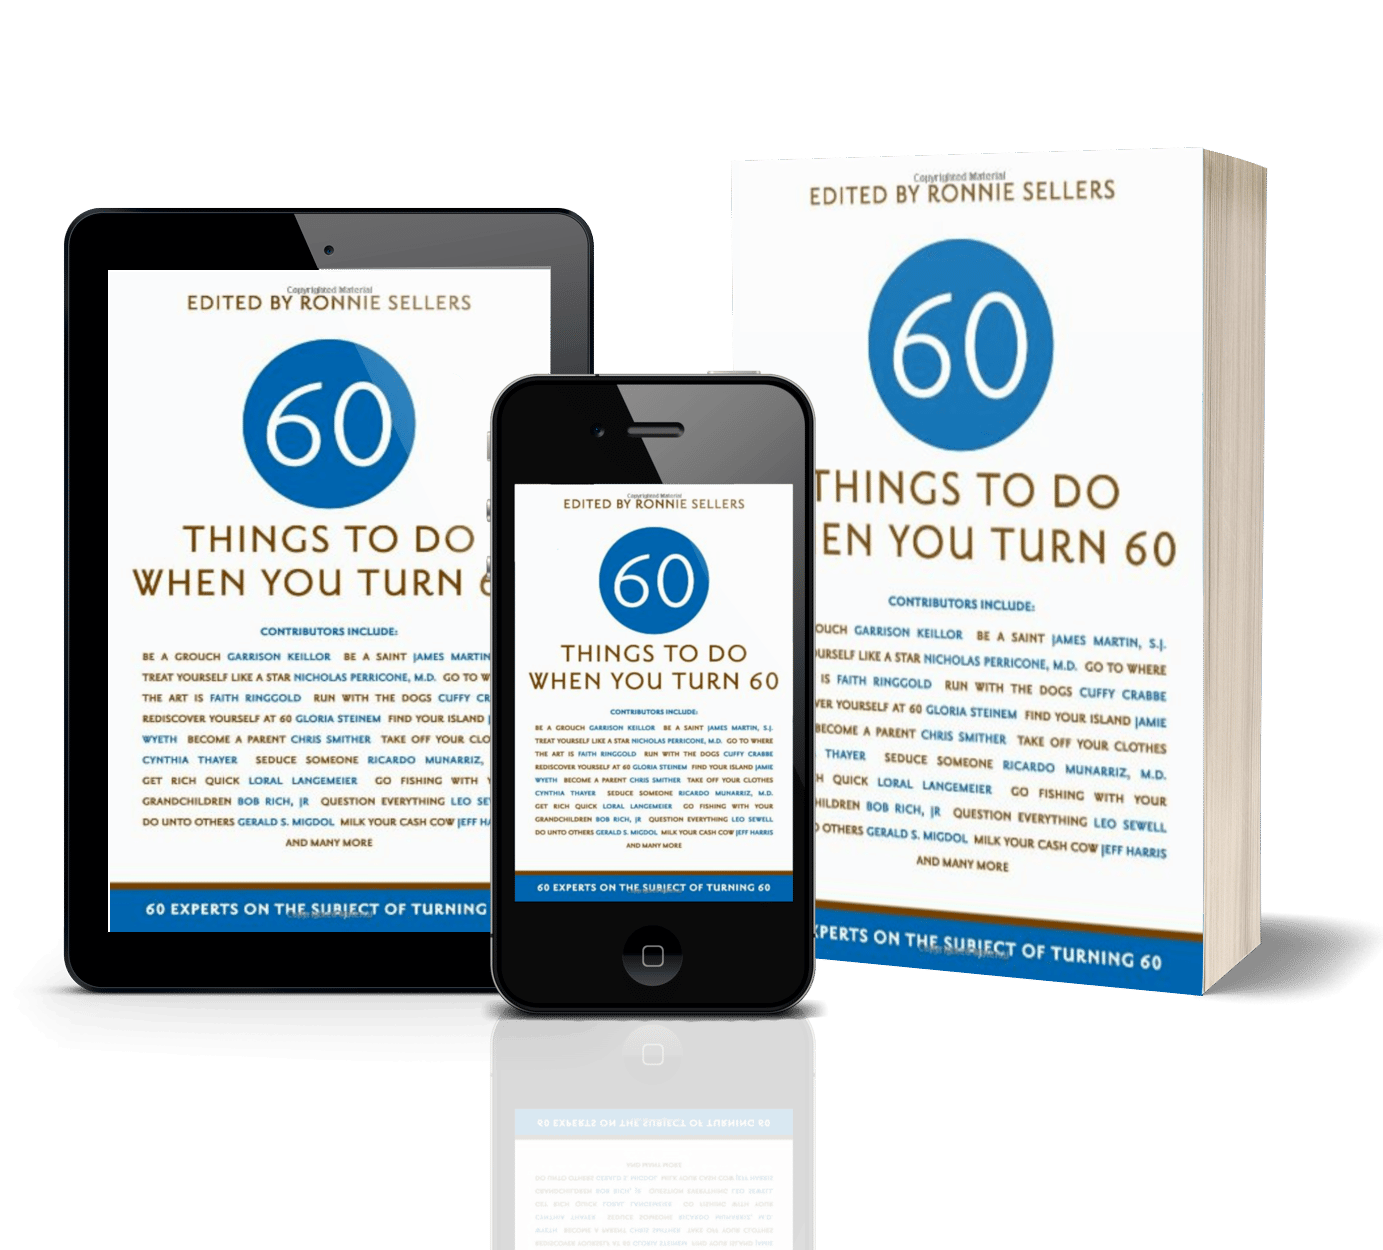 60 things to do when you turn 60